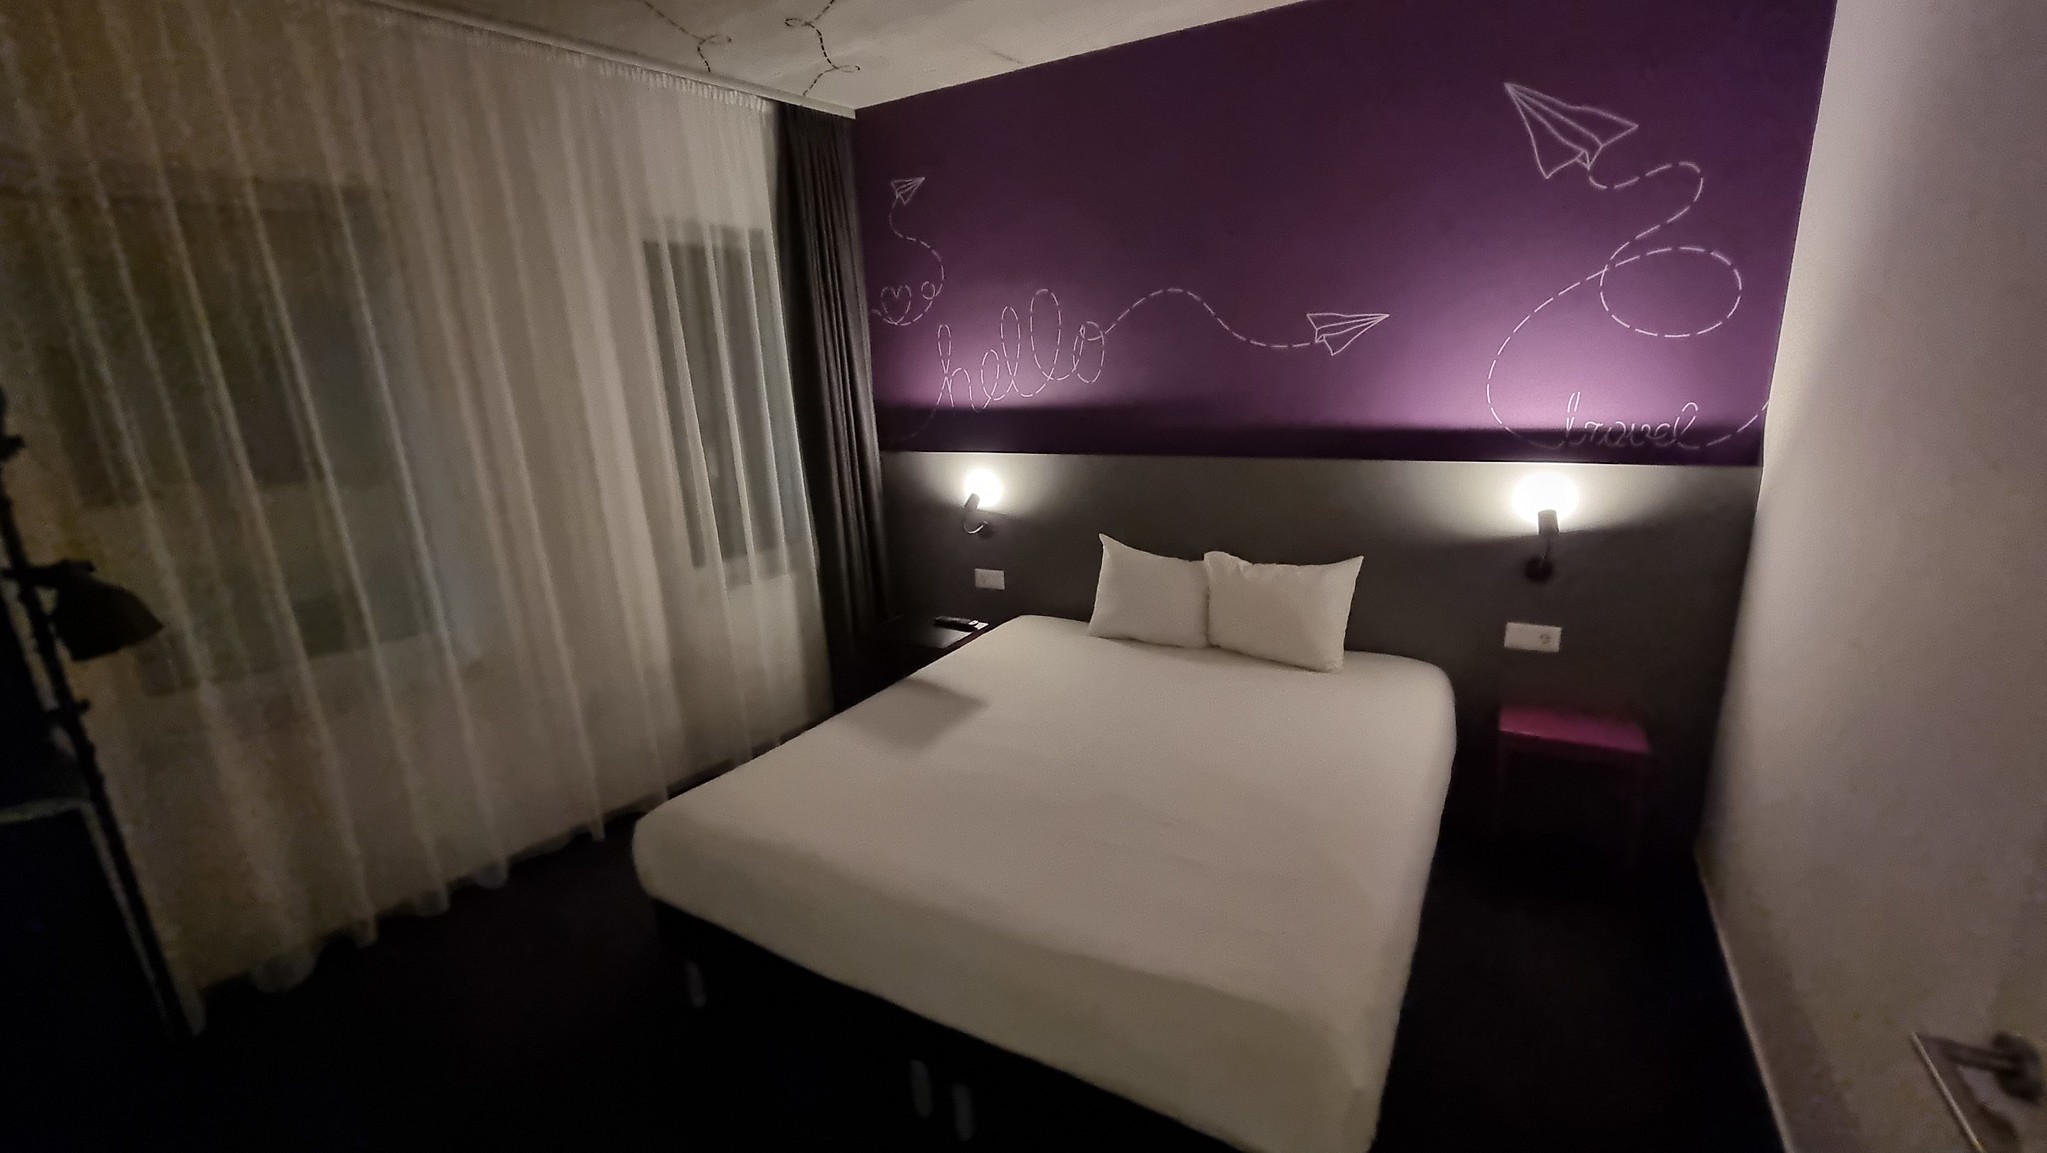 The bedroom  at the Ibis Styles Hotel at Budapest Airport